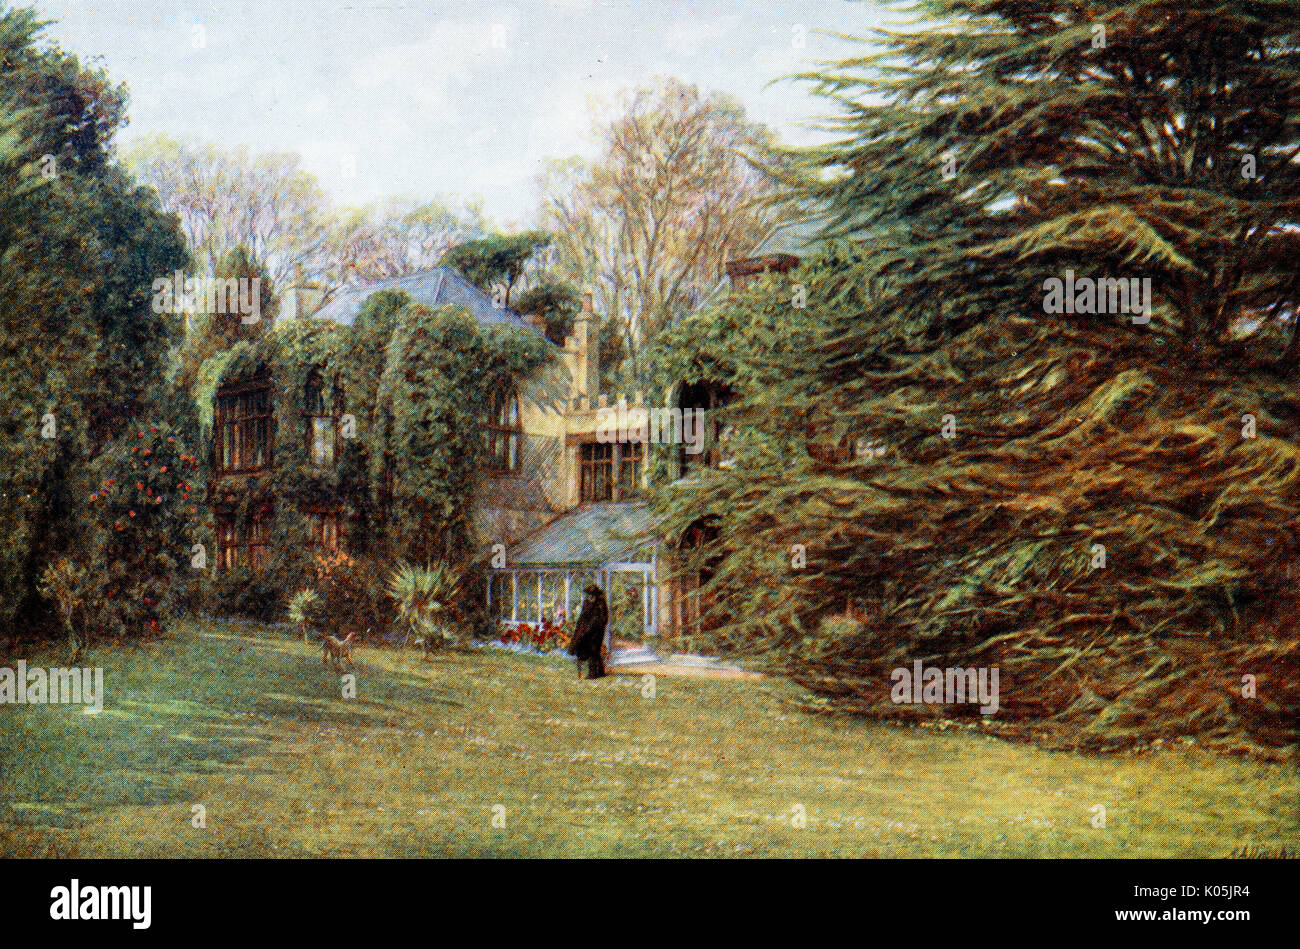 Alfred lord Tennyson (1809 - 1892) the poet's home at Farringford, Isle of Wight       Date: Stock Photo